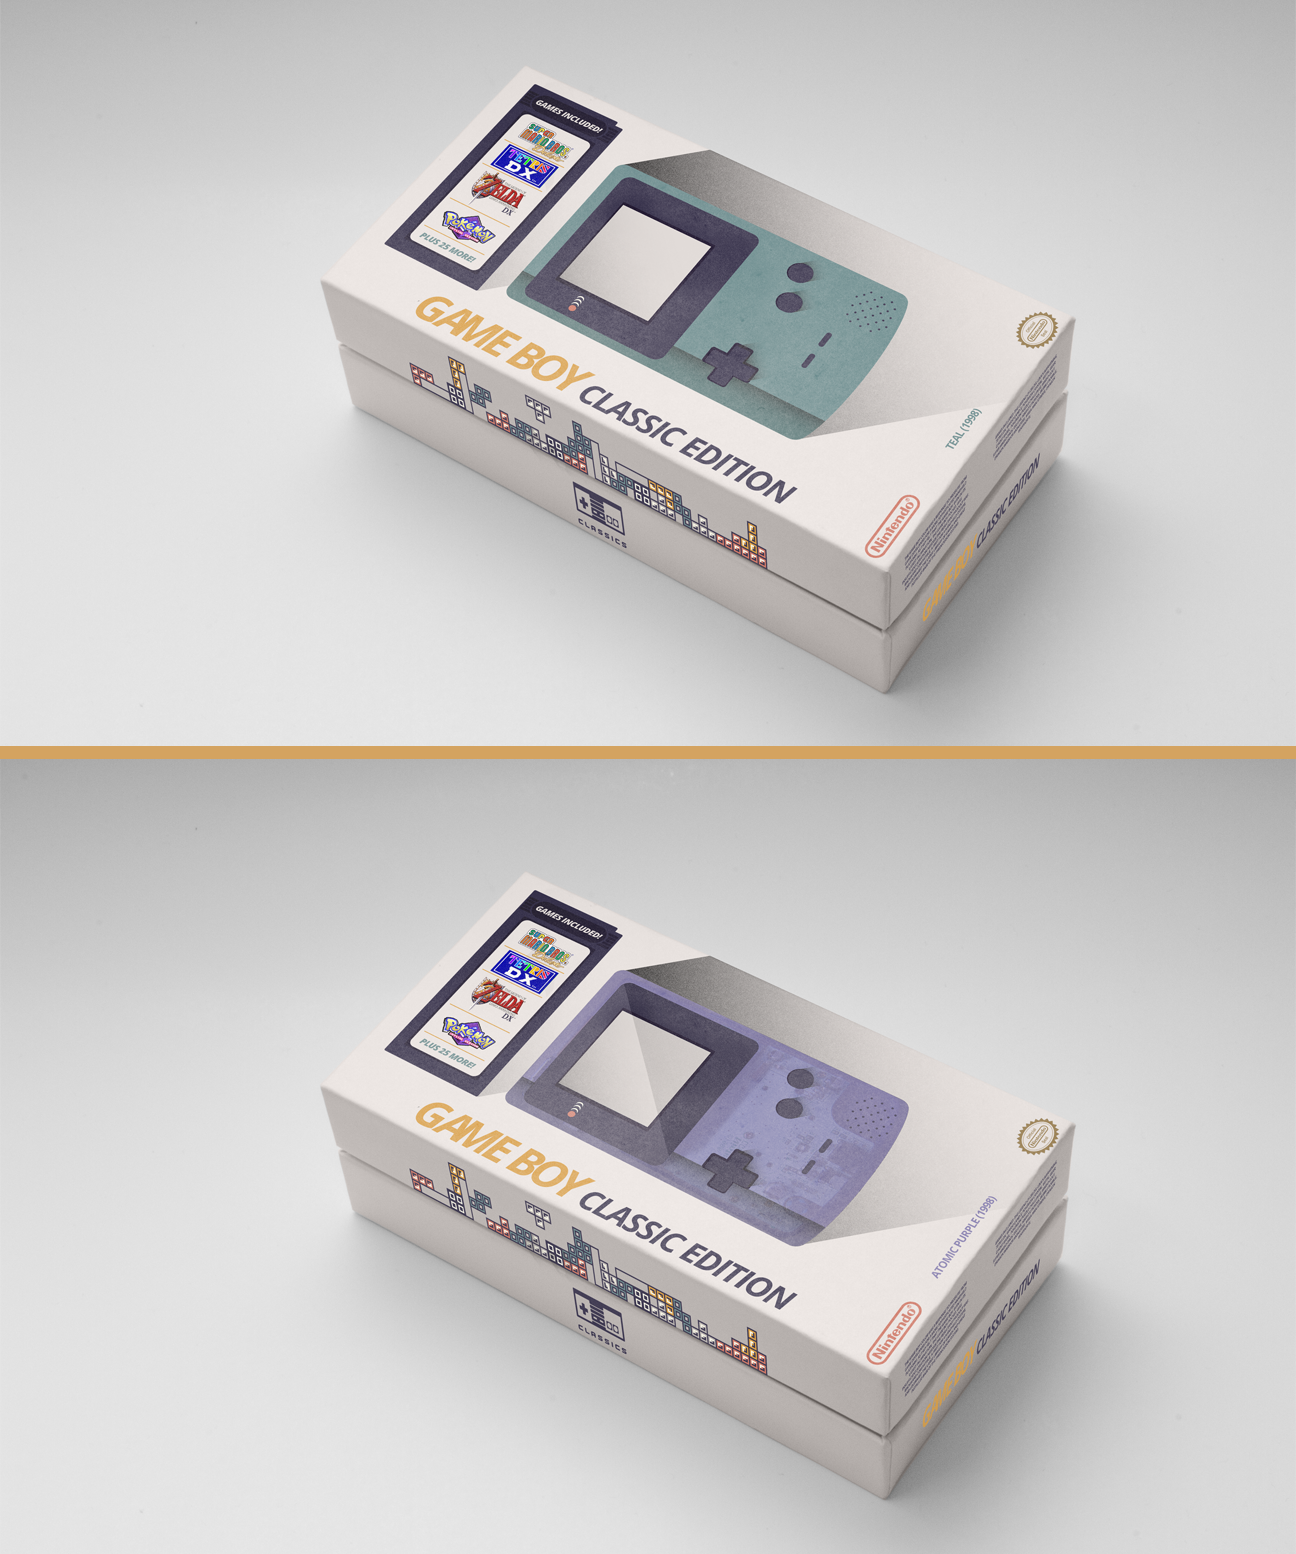 gameboy classic release date